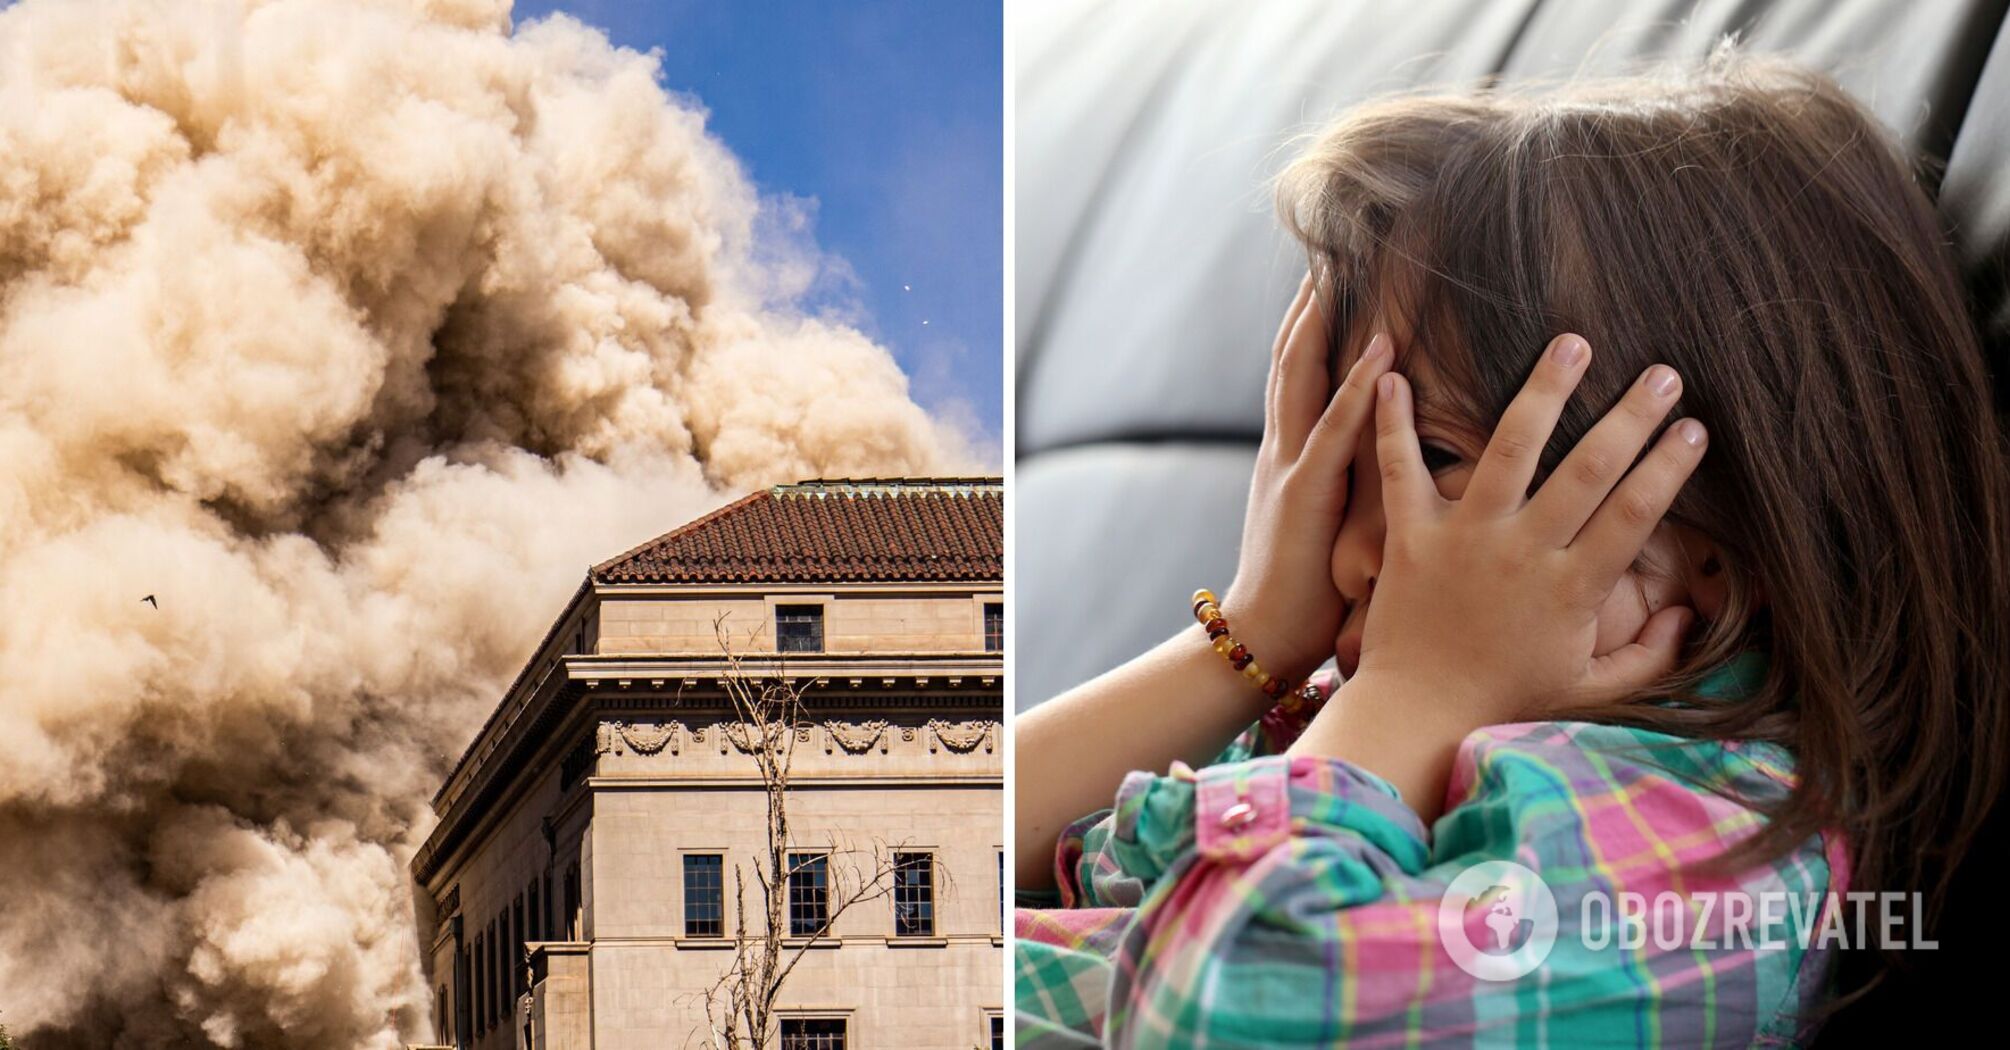 How to support a child during shelling and help them cope with fear